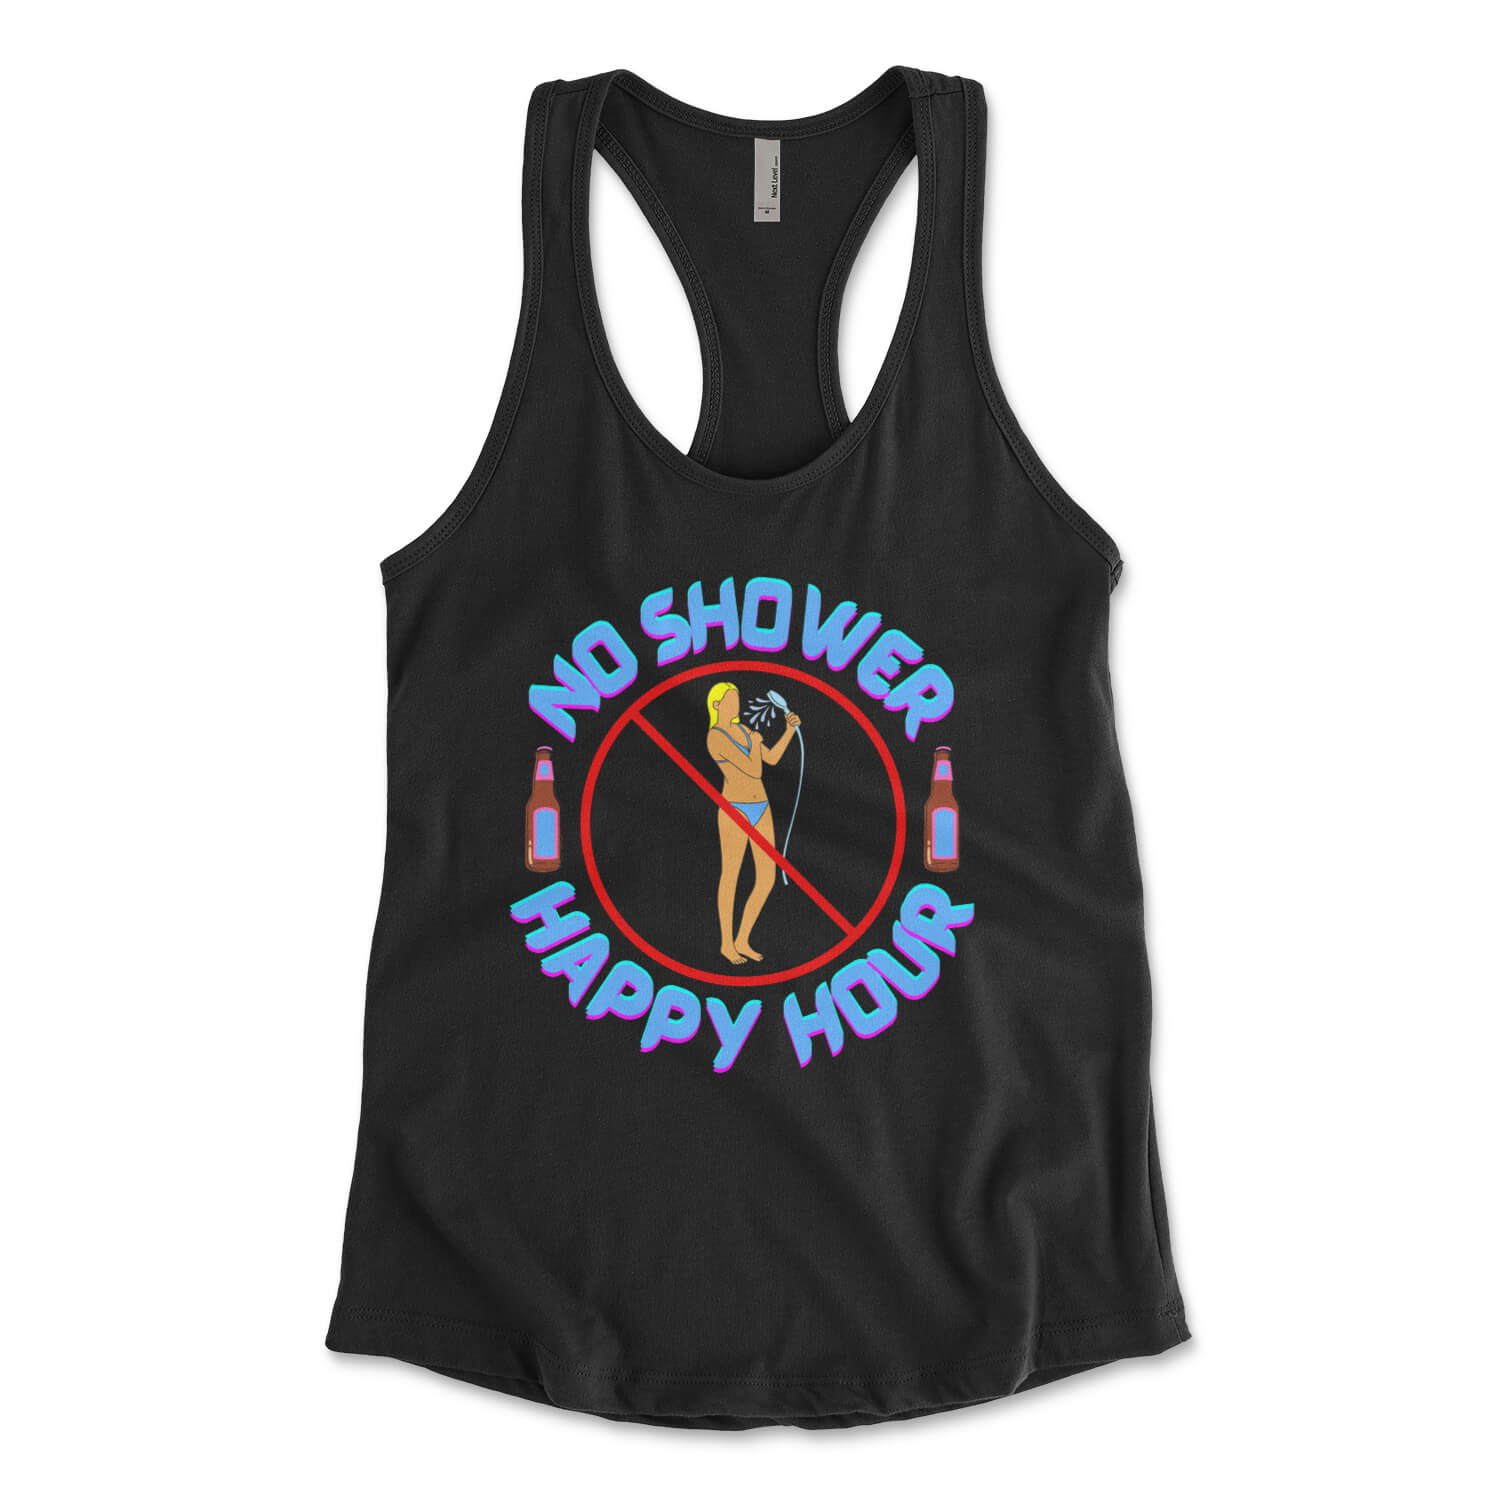 No shower happy hour sea isle city new jersey black womens tank top Phillygoat